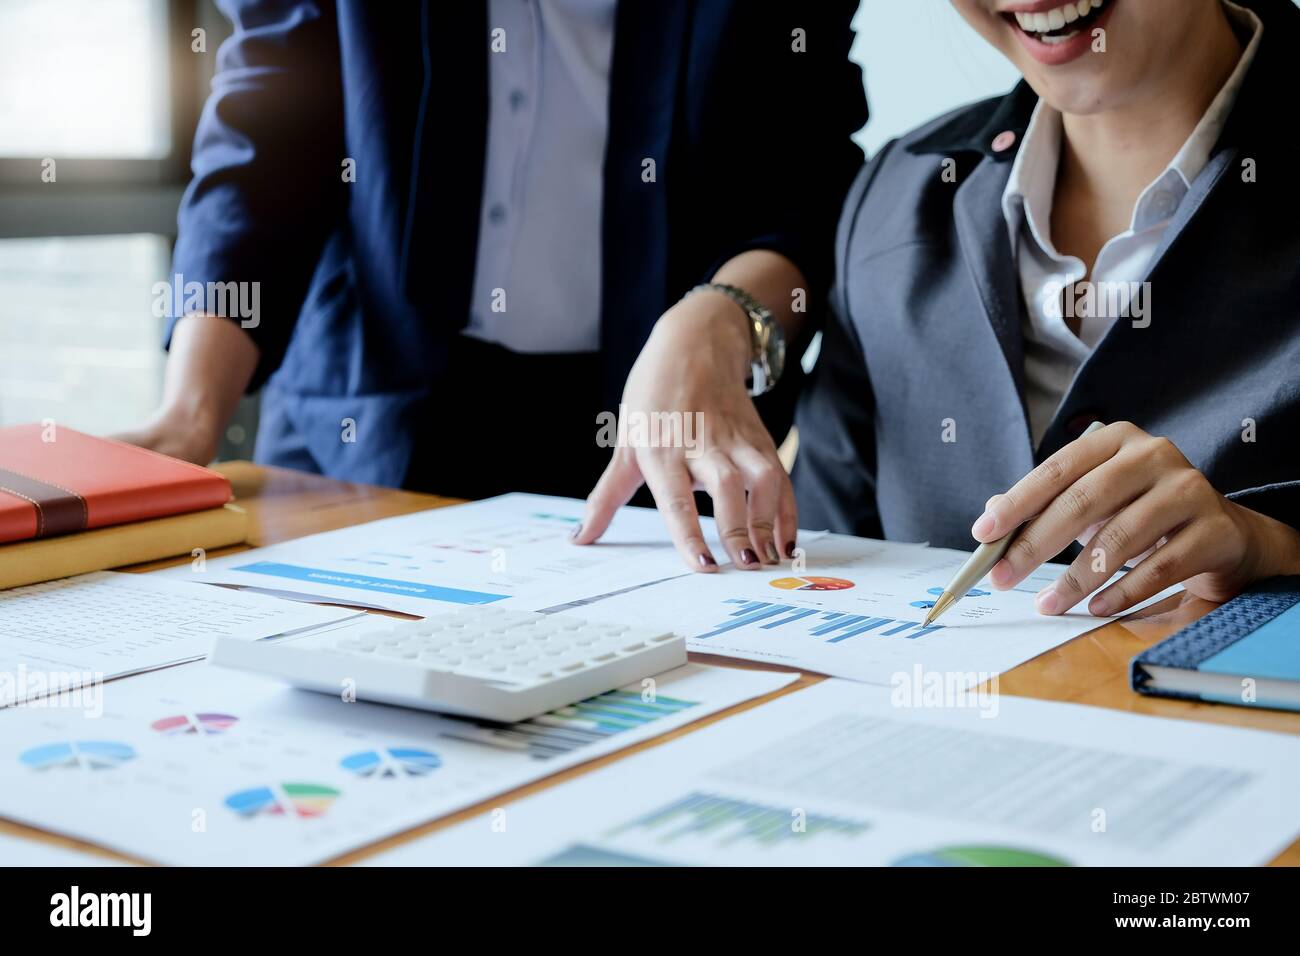 Group of businesswoman discussing on stock market charts in office Stock Photo